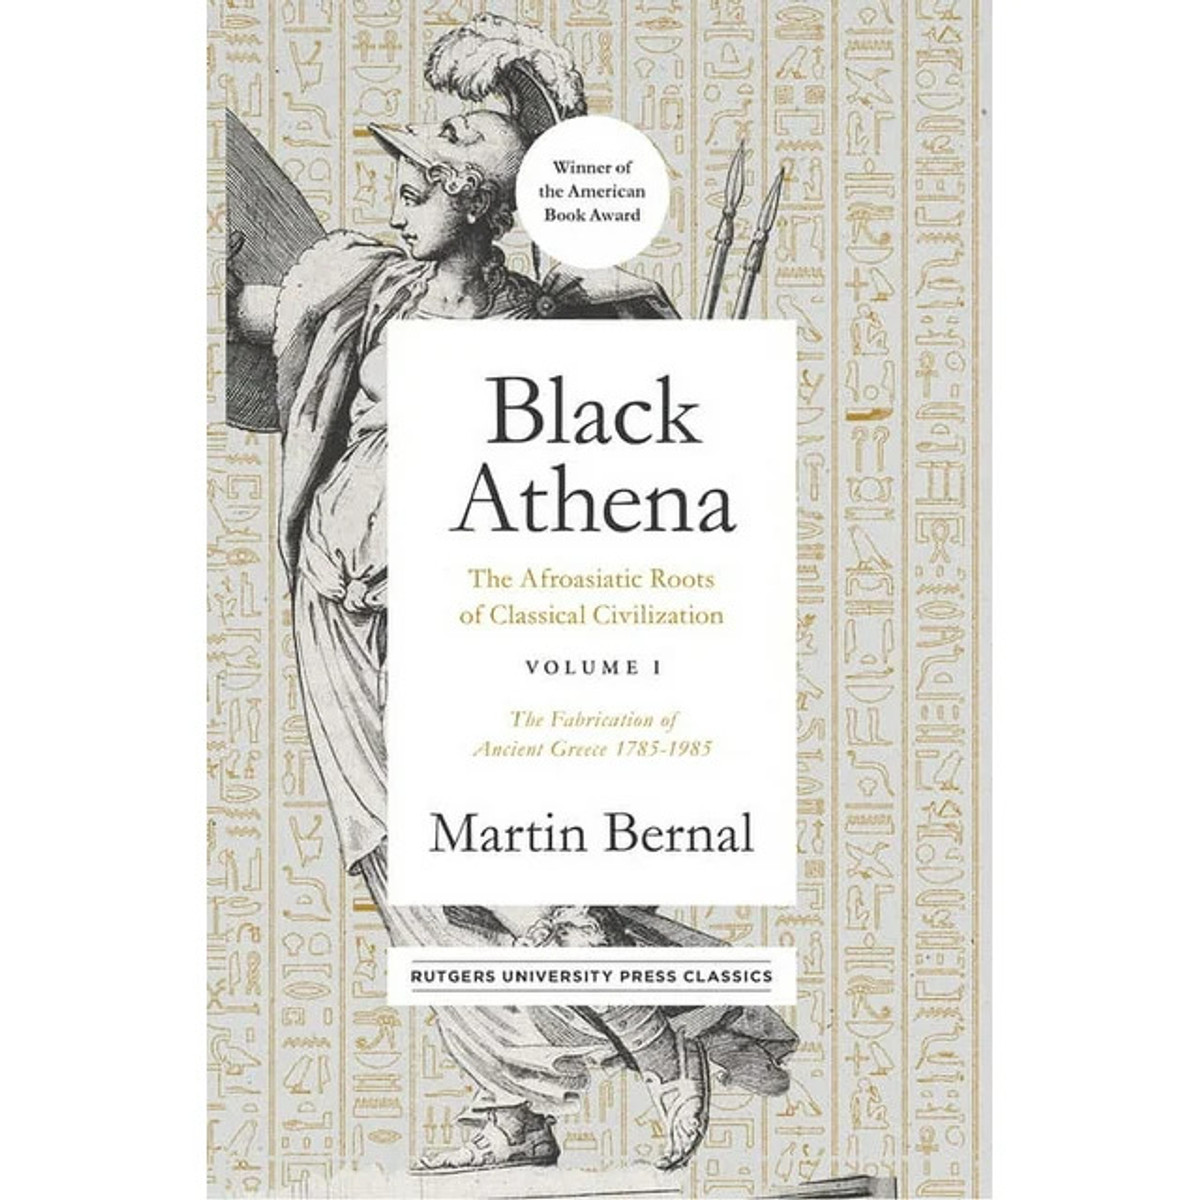 Black Athena: The Afroasiatic Roots of Classical Civilization Volume I: The Fabrication of Ancient Greece 1785-1985 (Volume 1) by Martin Bernal